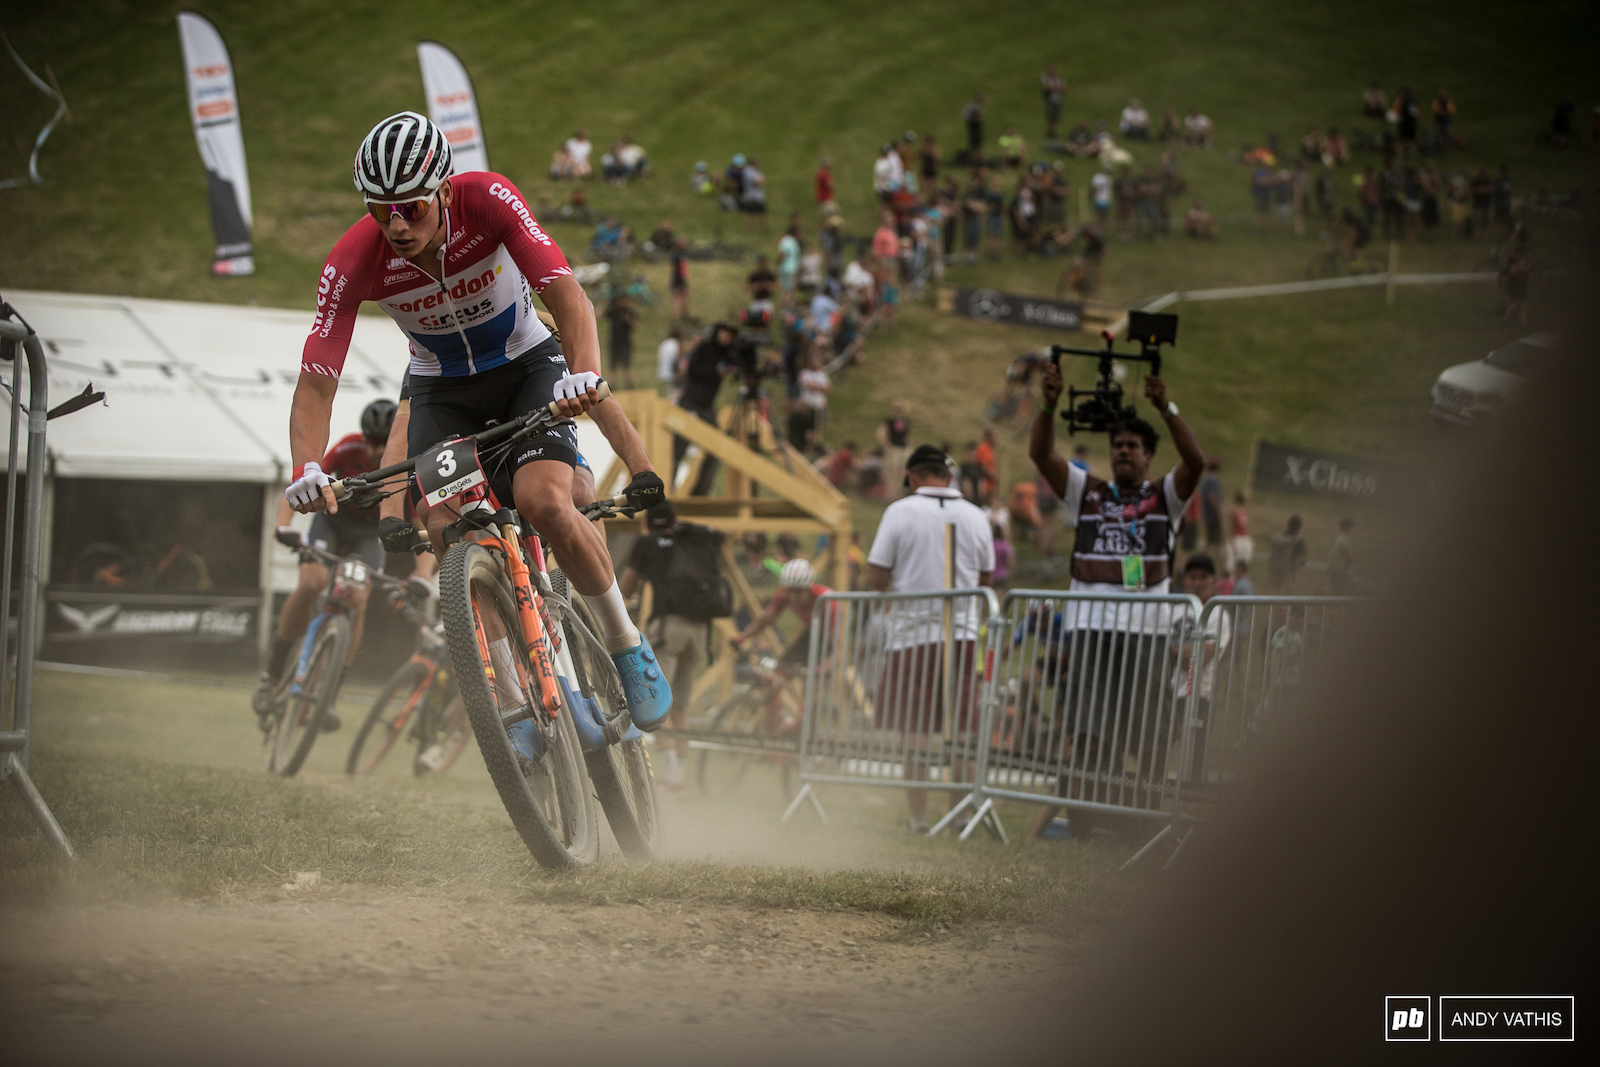 Mathieu van der Poel waited patiently until he made his move to the front in the last couple hundred meters of the race.